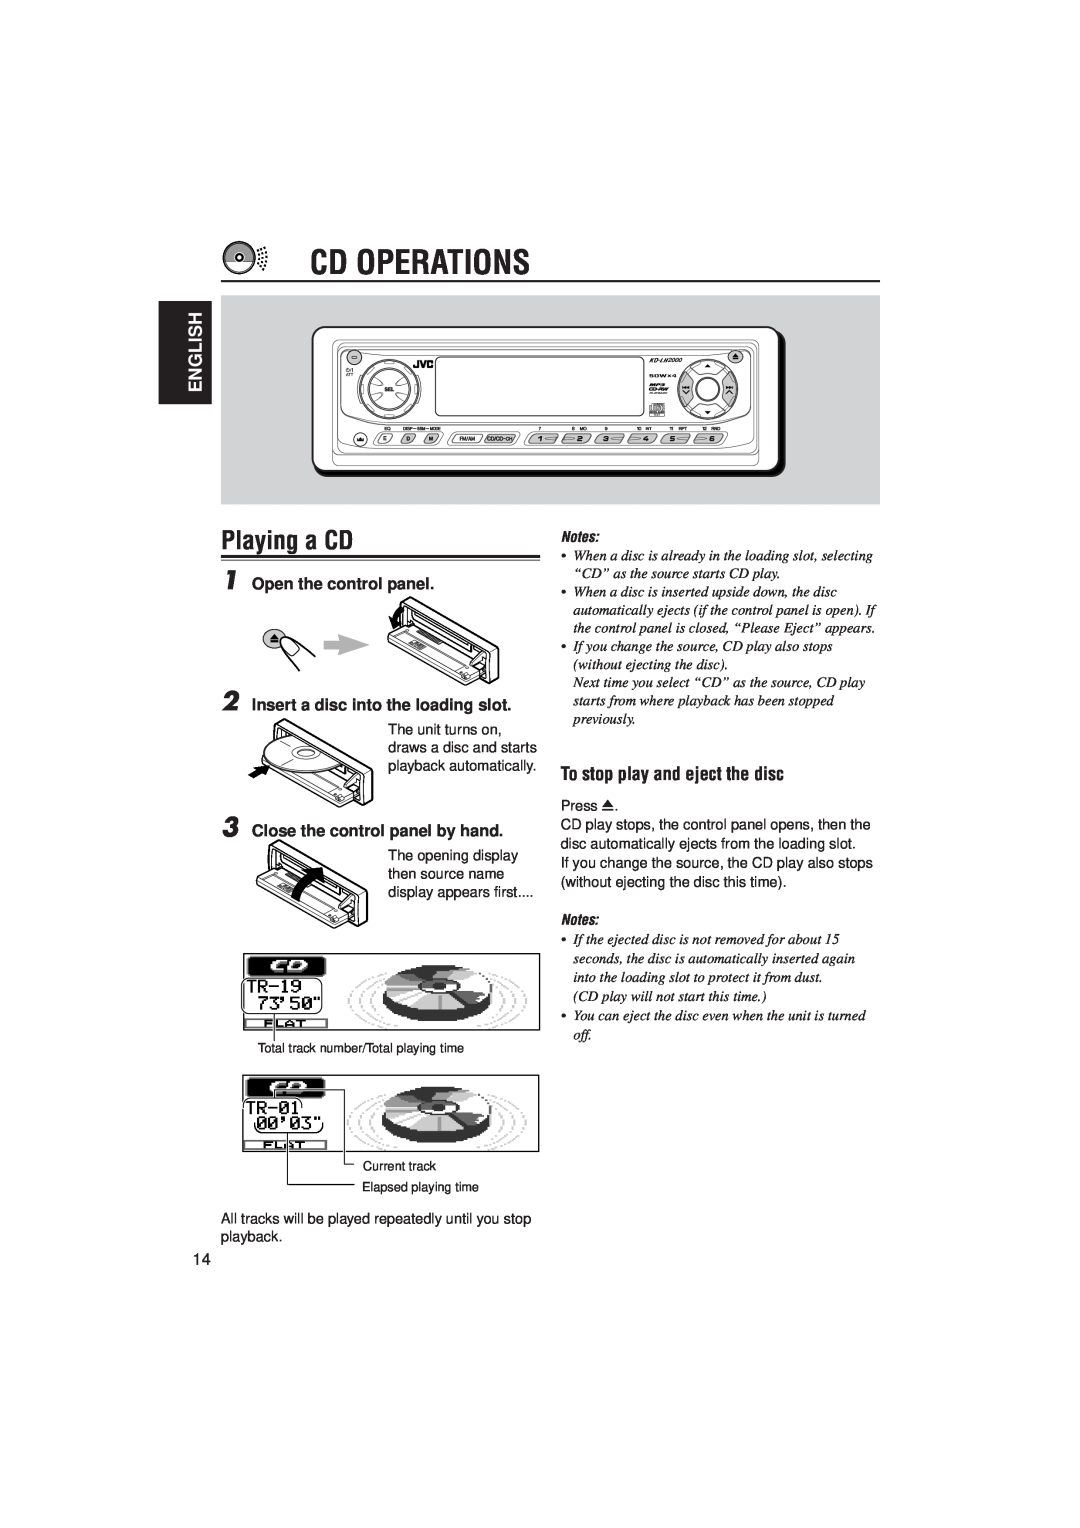 JVC IKD-LH2000 manual Cd Operations, Playing a CD, English, To stop play and eject the disc, Notes 